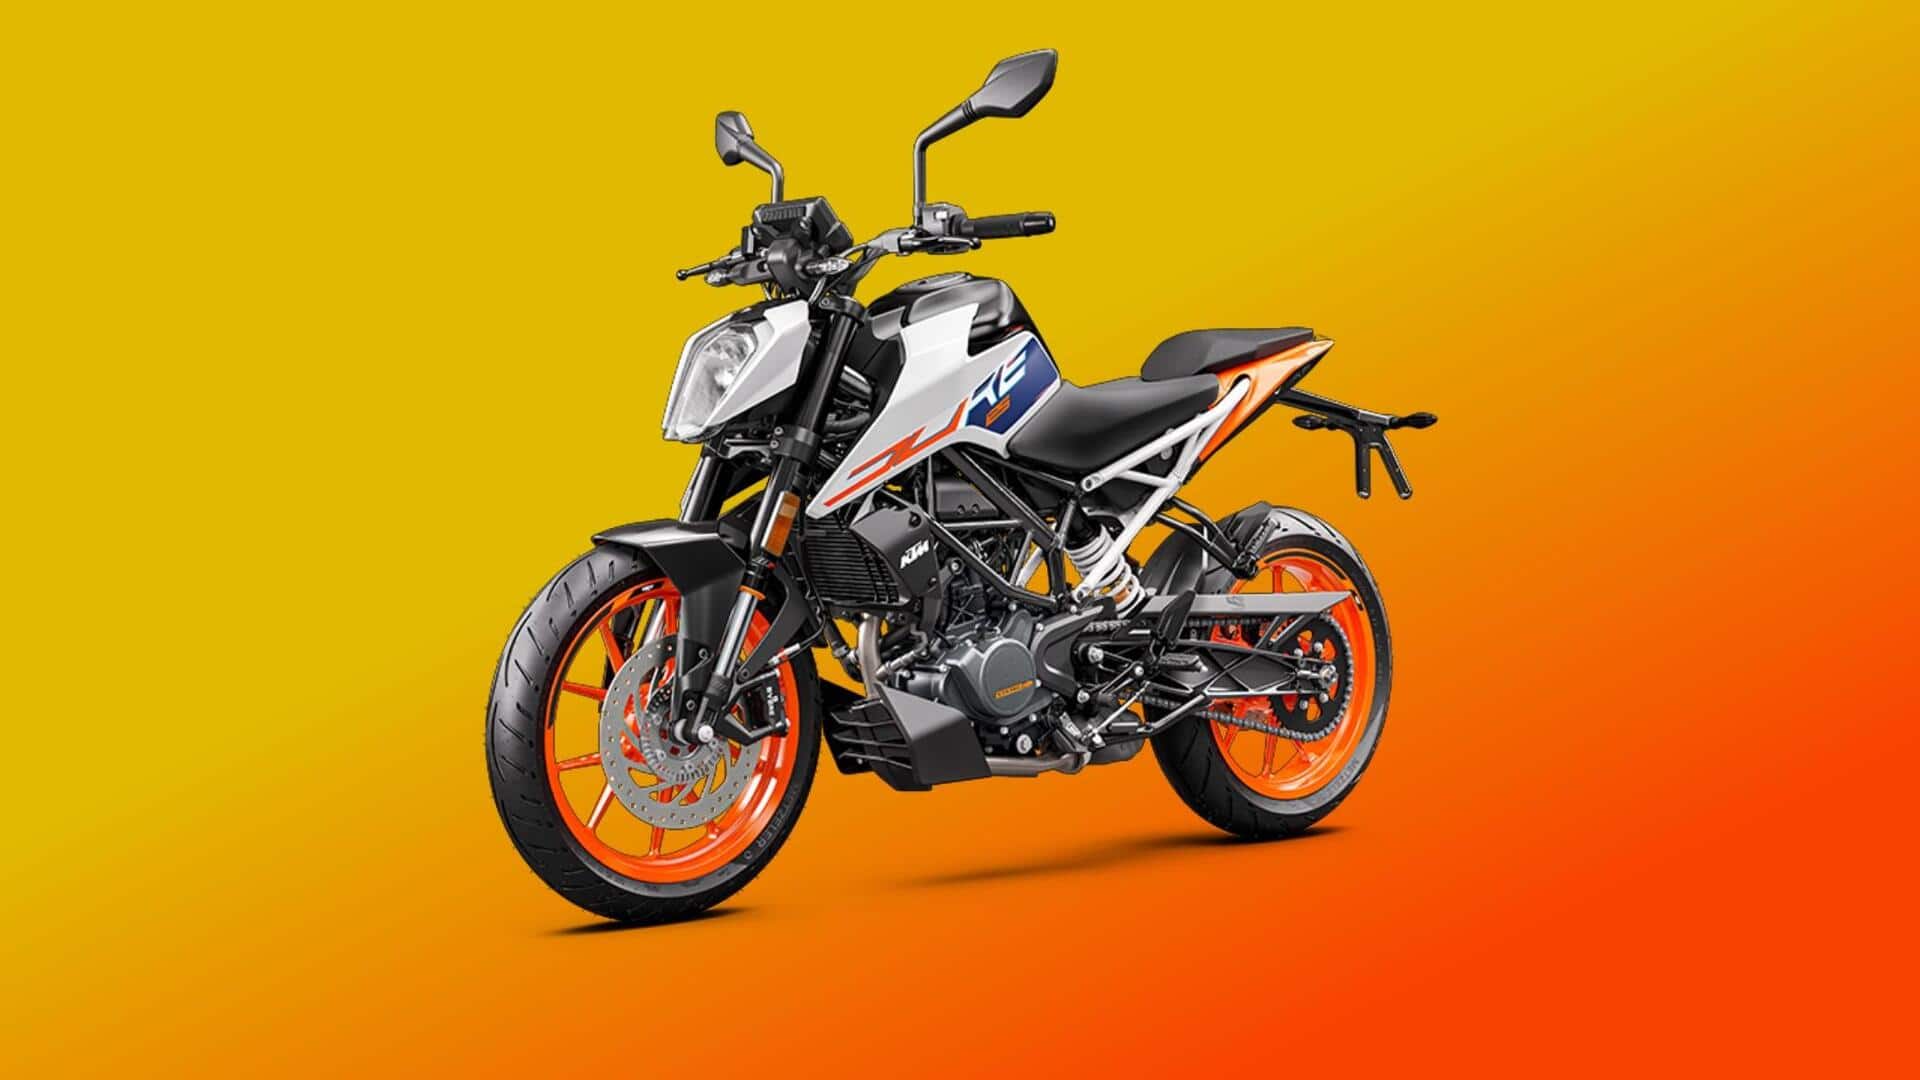 Top 5 performance-focused 125cc motorcycles you can buy in India